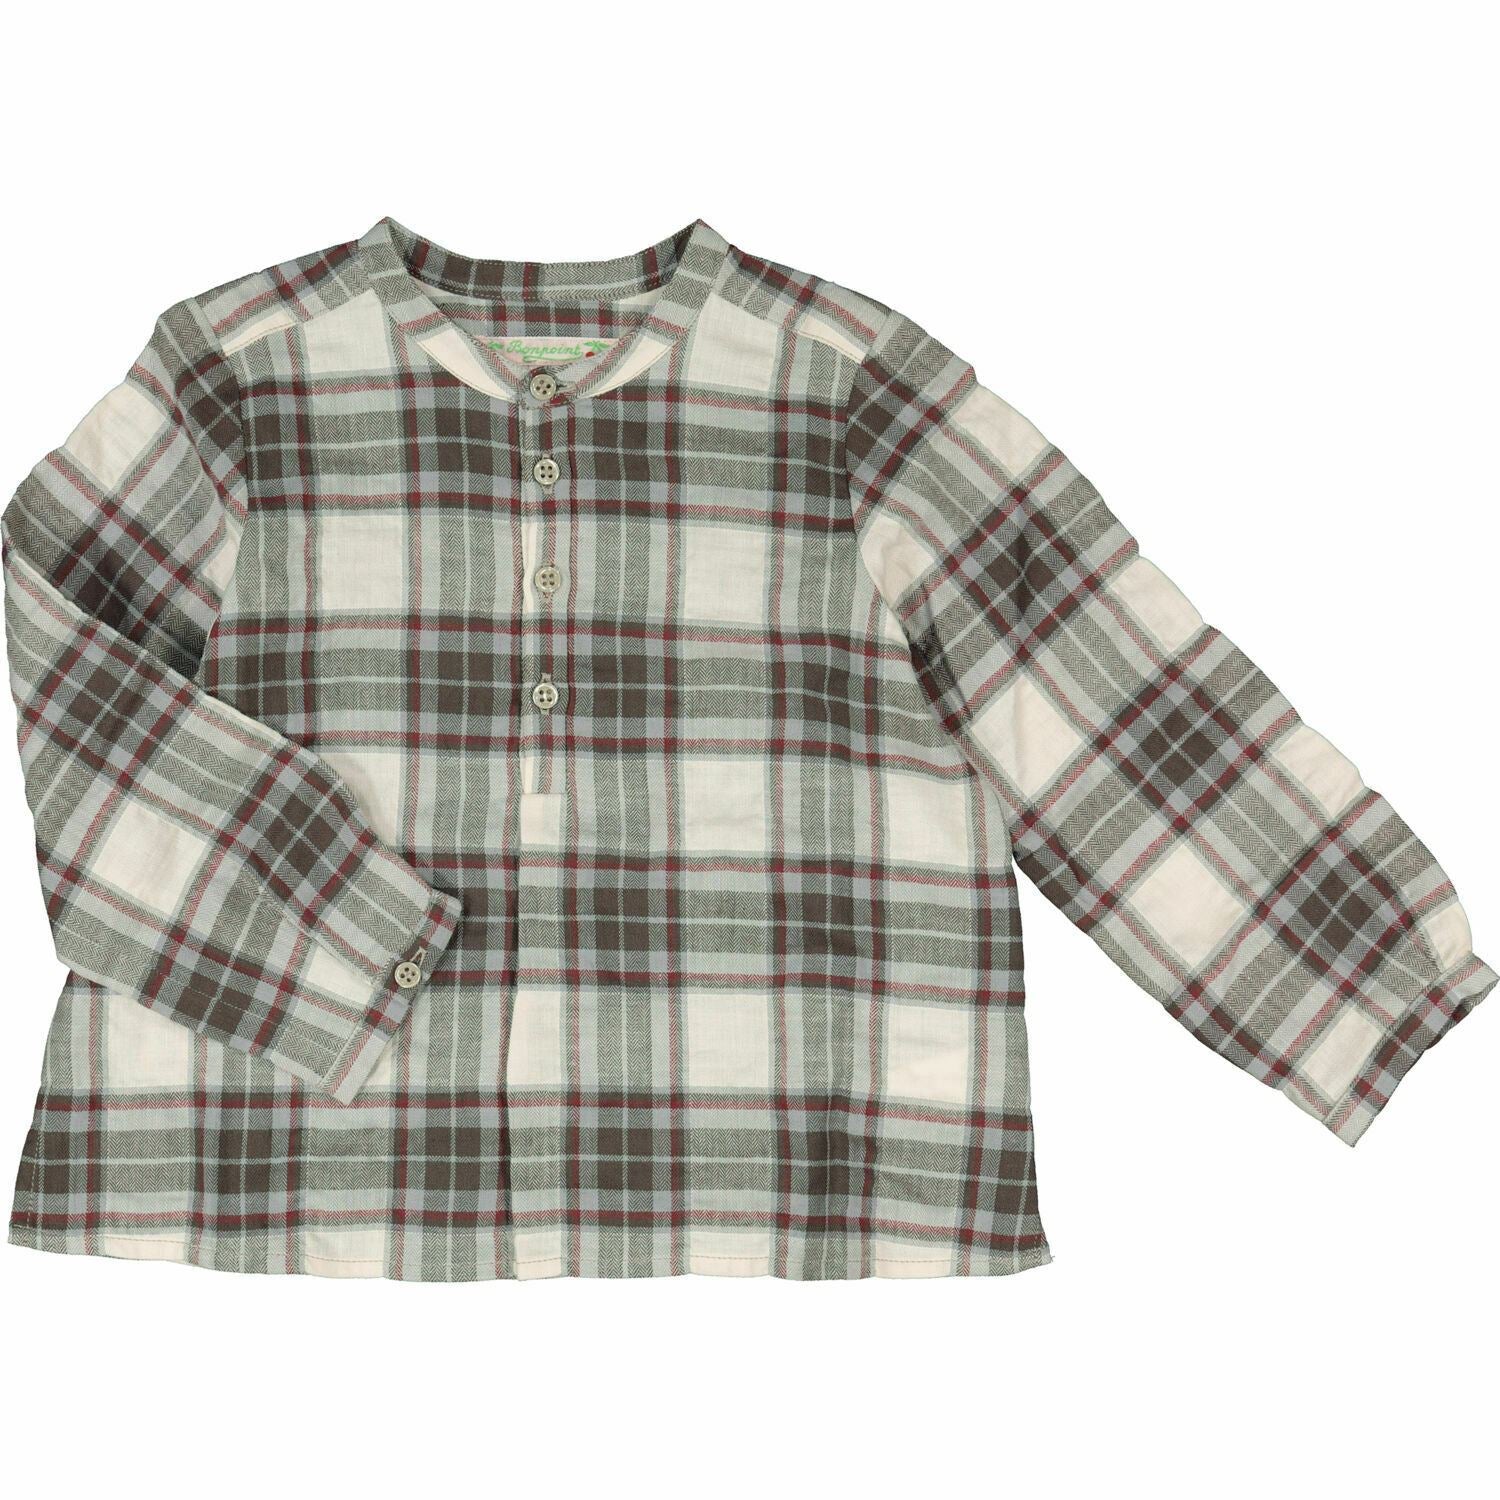 BONPOINT Baby Girls' Long Sleeve Checked Shirt Top, White/Red/Grey, size 2 years